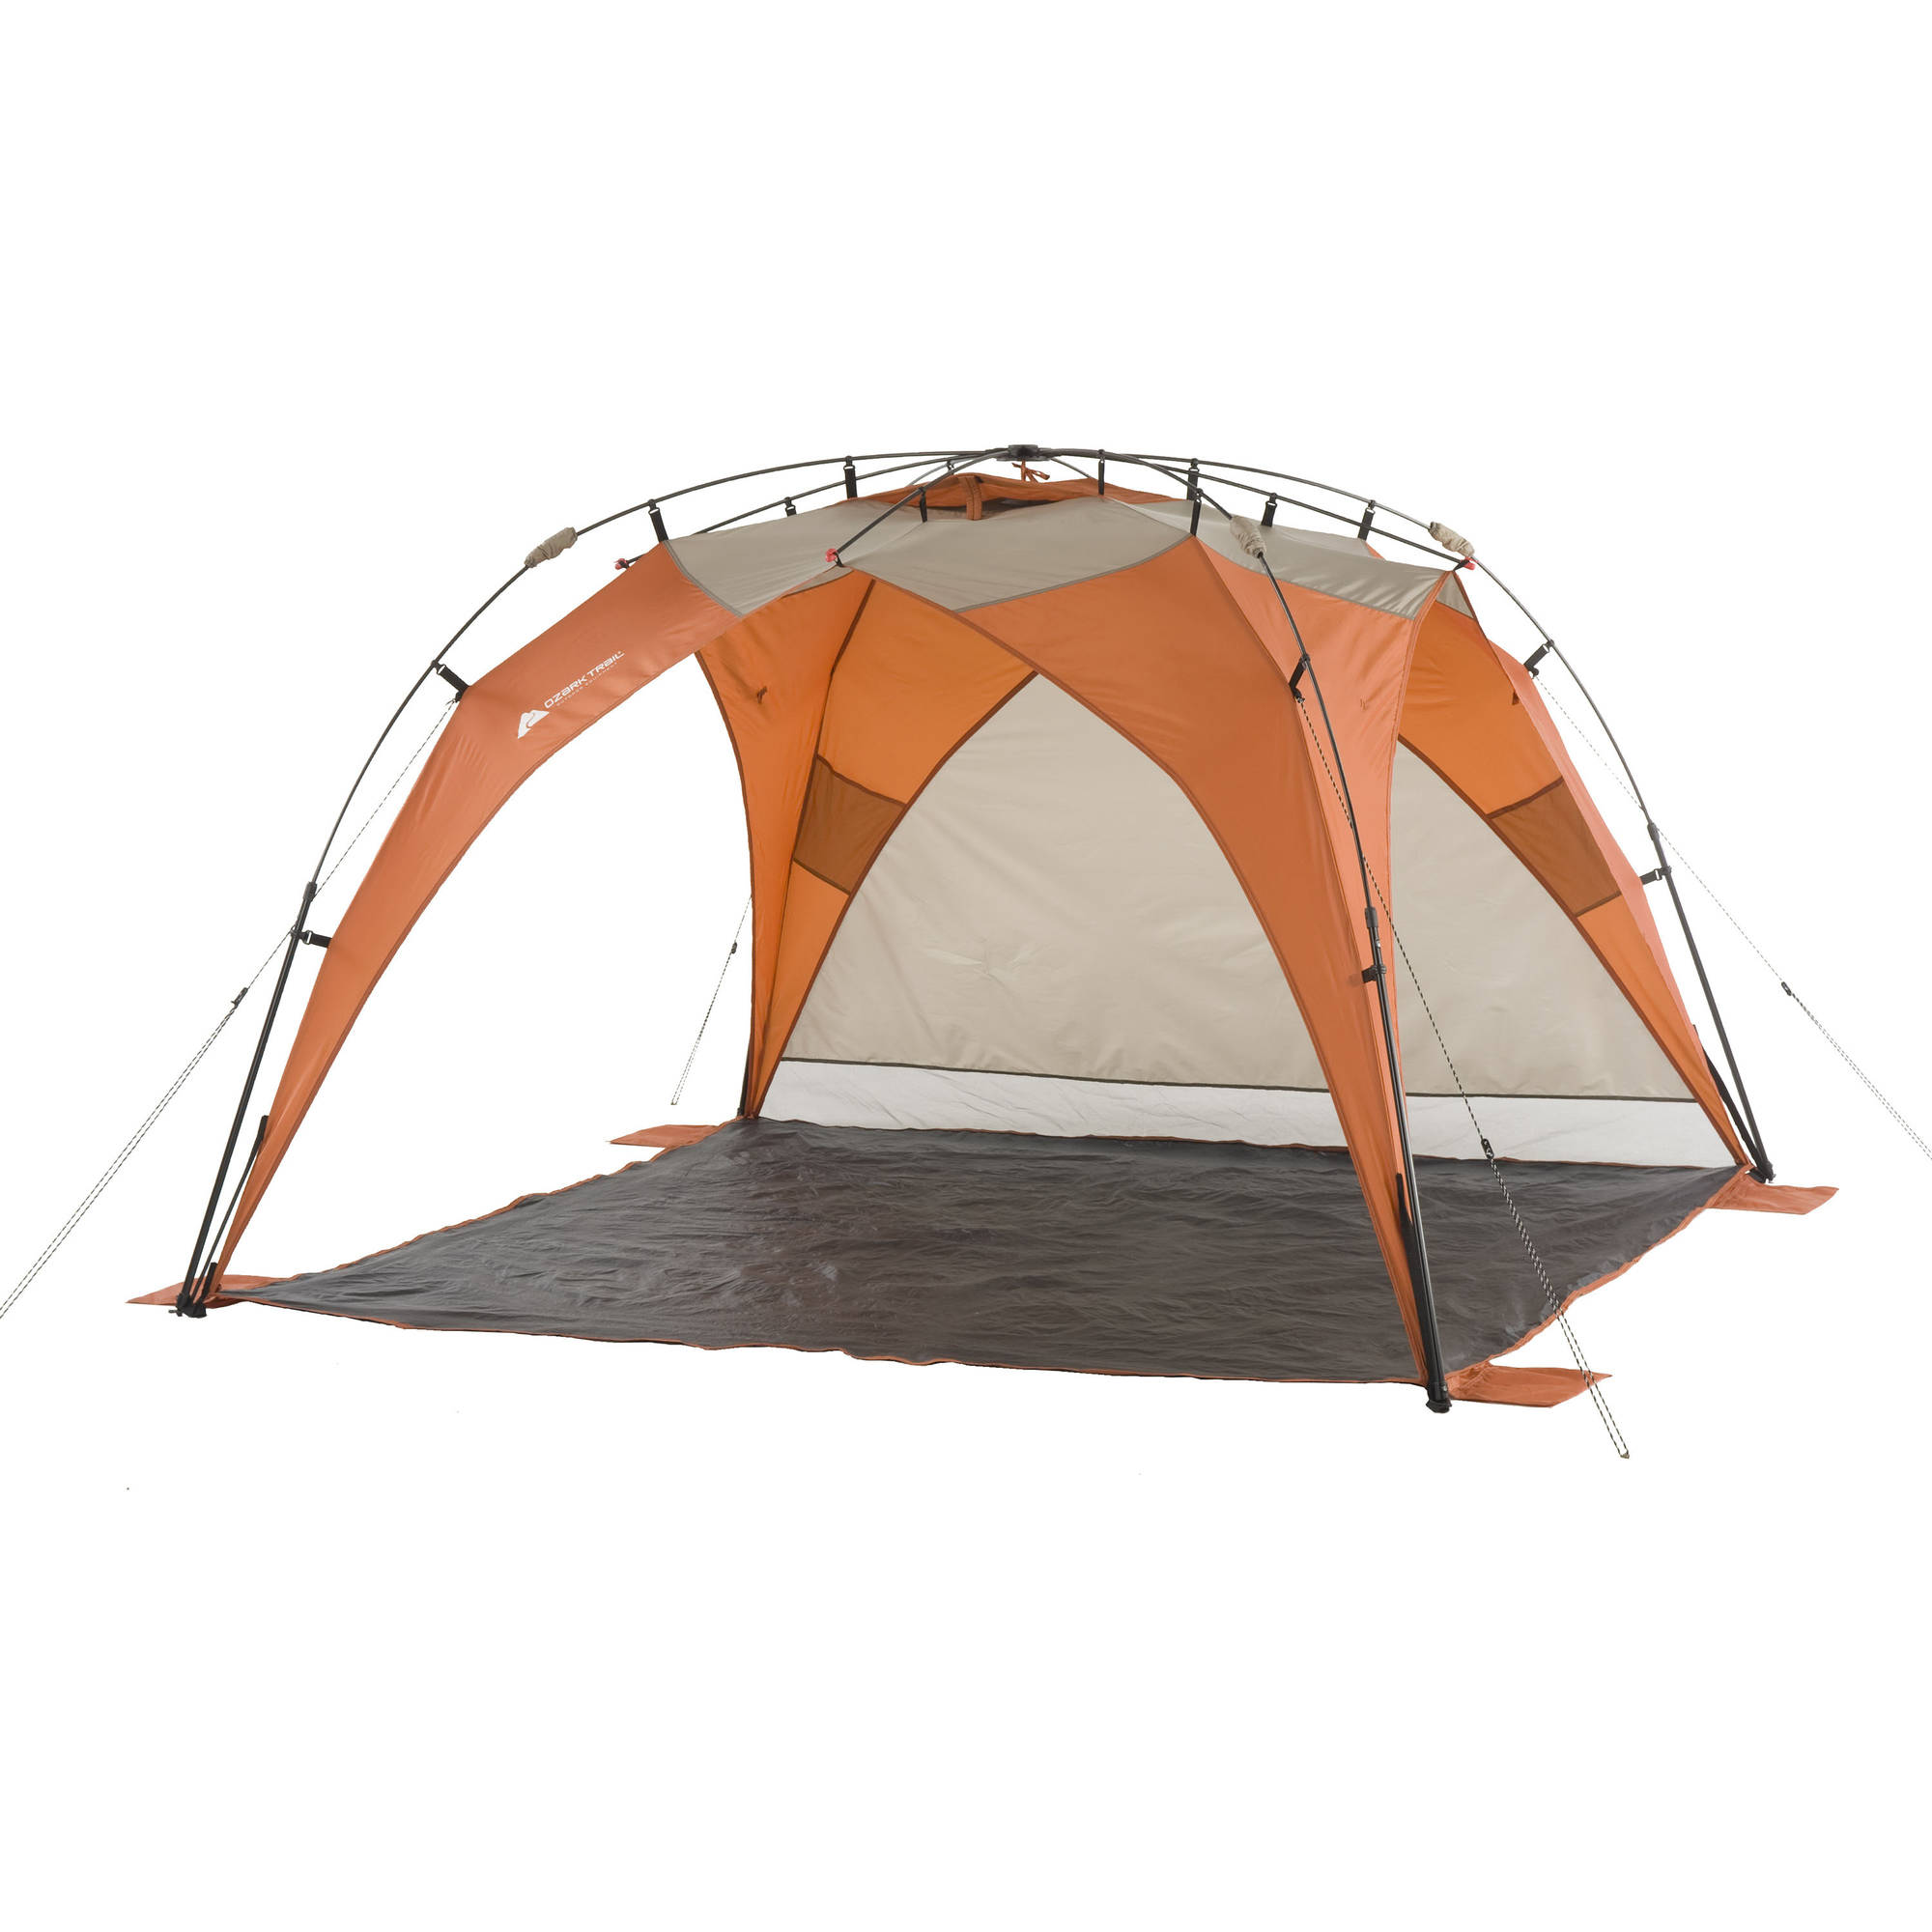 Ozark Trail 8' x 8' Instant Sun Shade with Removable Sun Wall - image 1 of 7